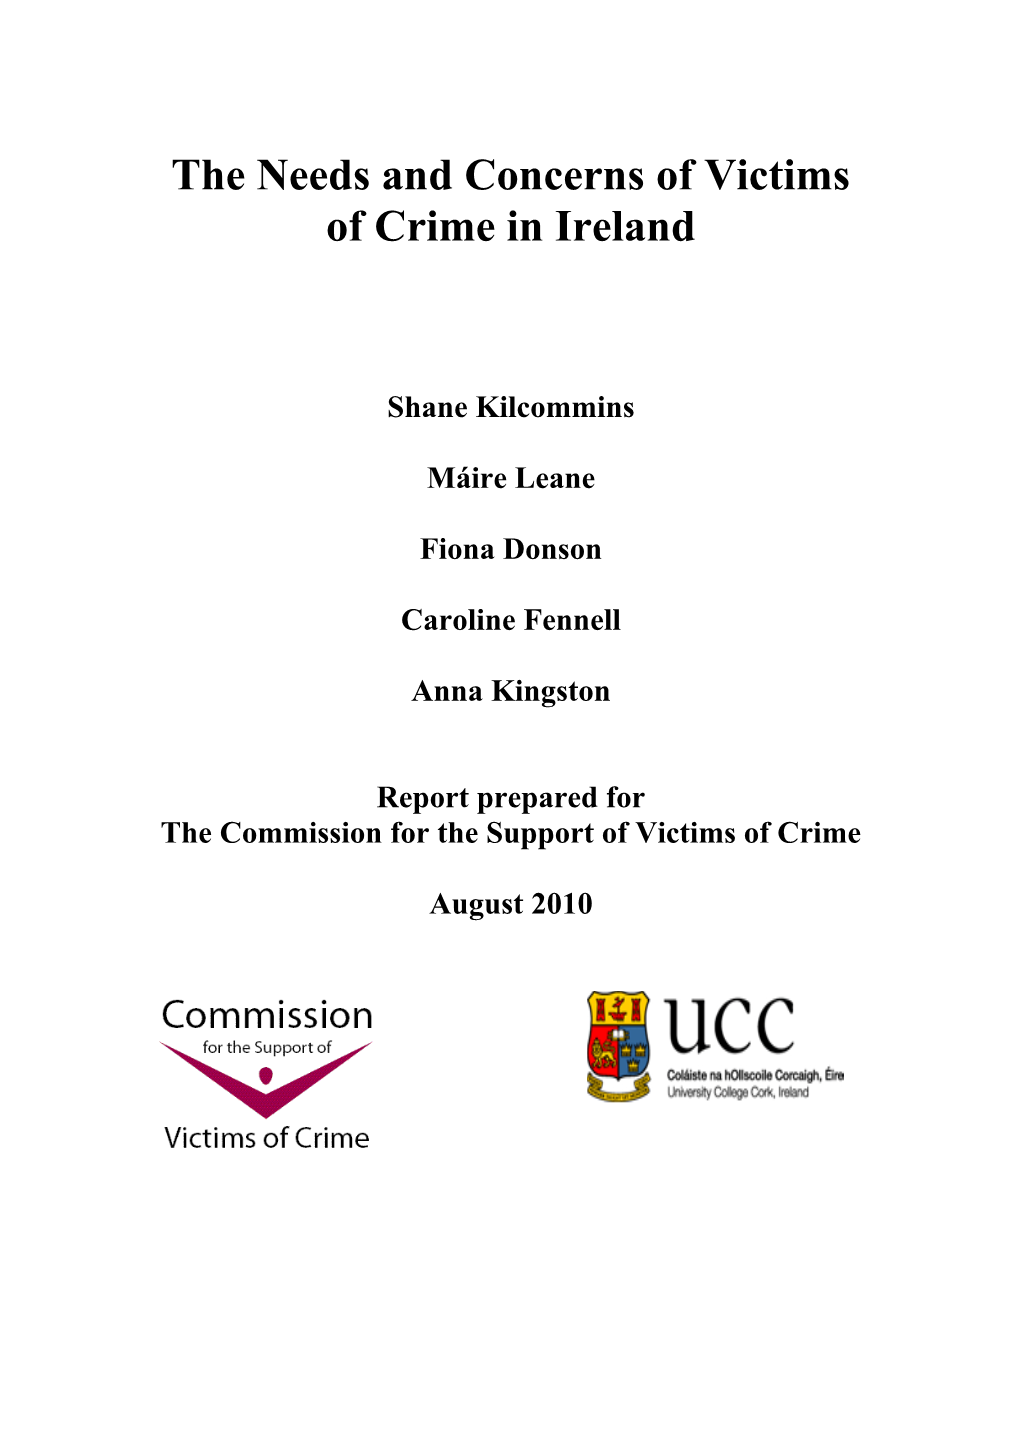 The Needs and Concerns of Victims of Crime in Ireland